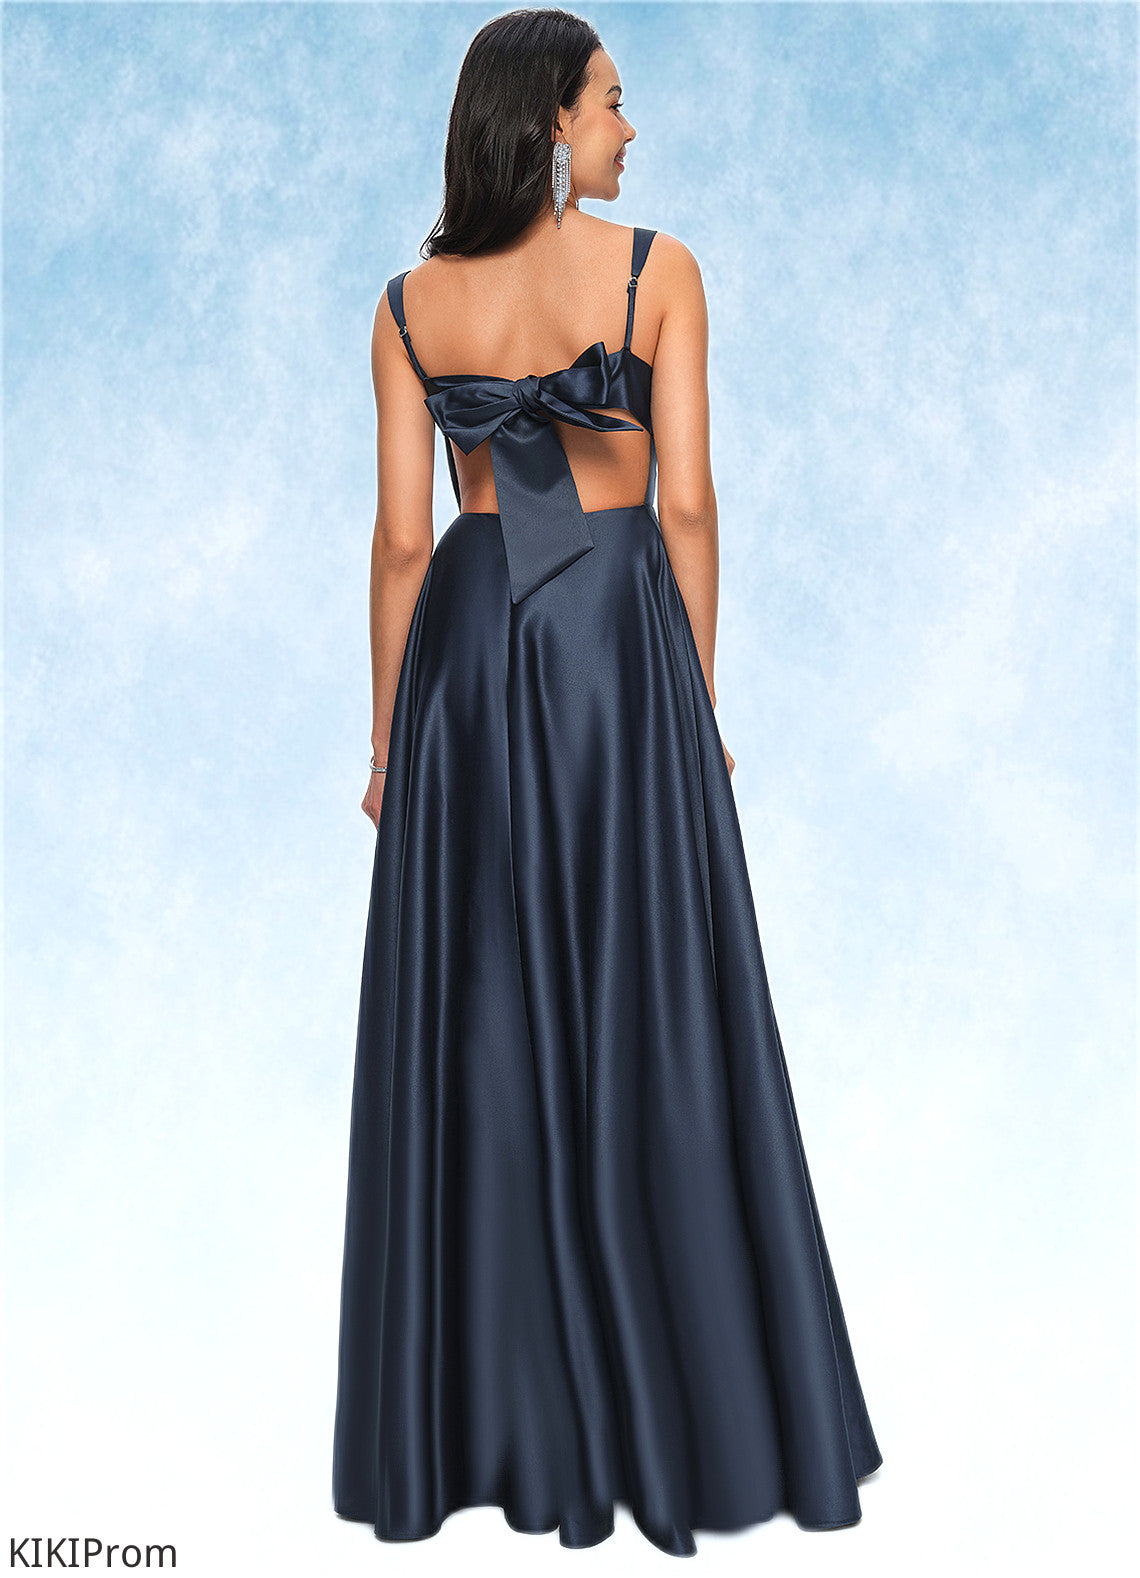 Thelma A-line Straight Floor-Length Satin Prom Dresses With Bow DZP0022195